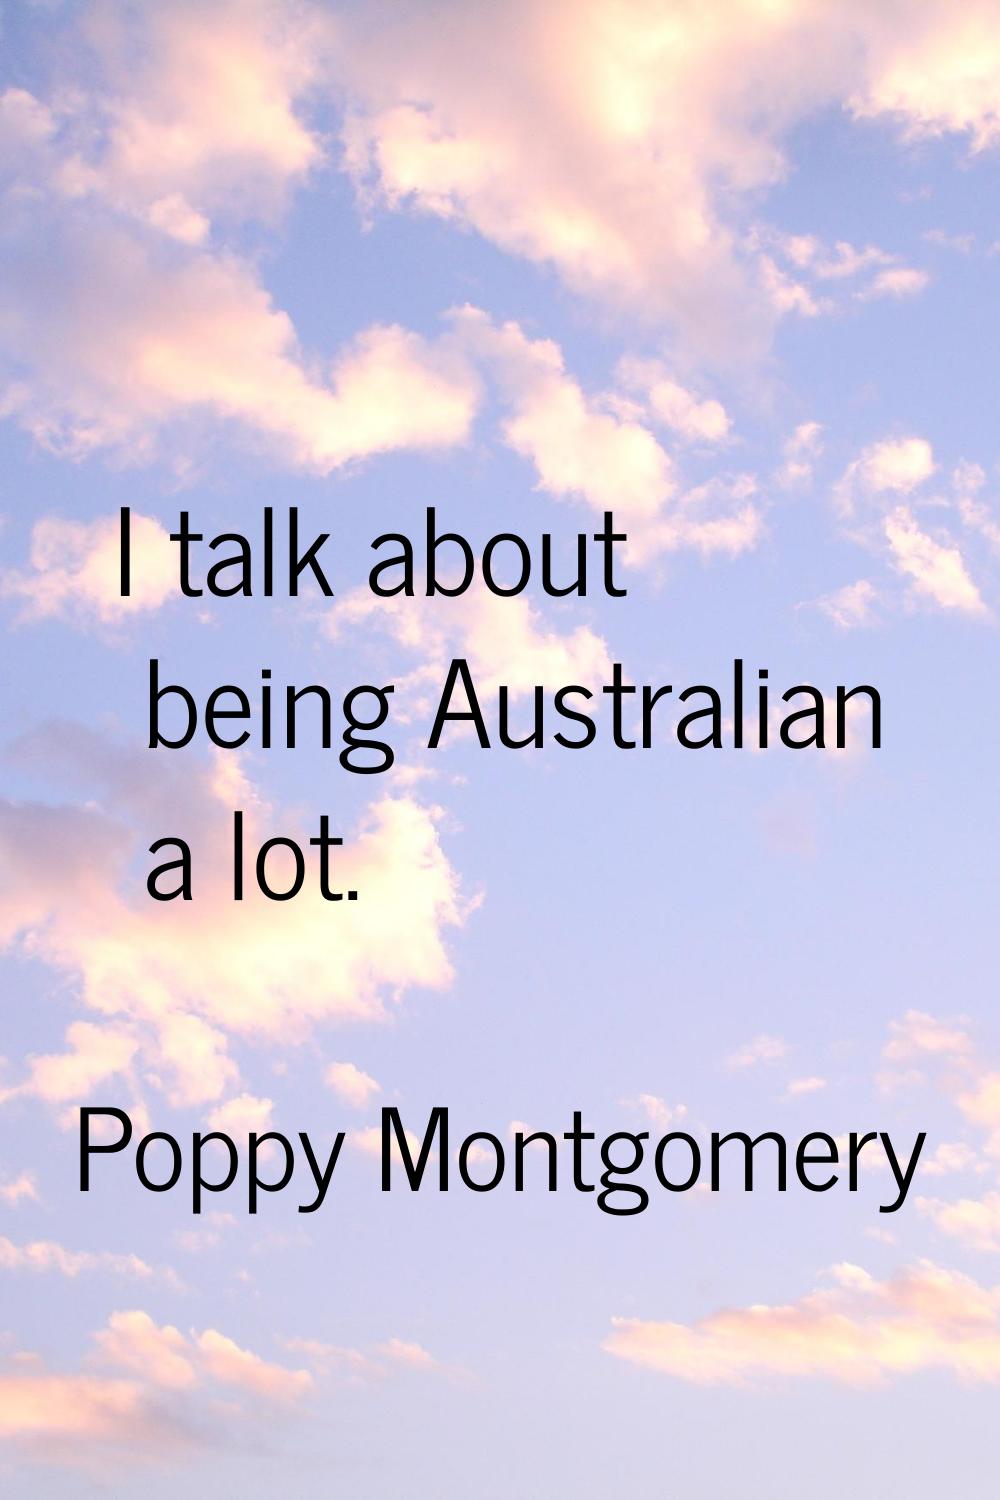 I talk about being Australian a lot.